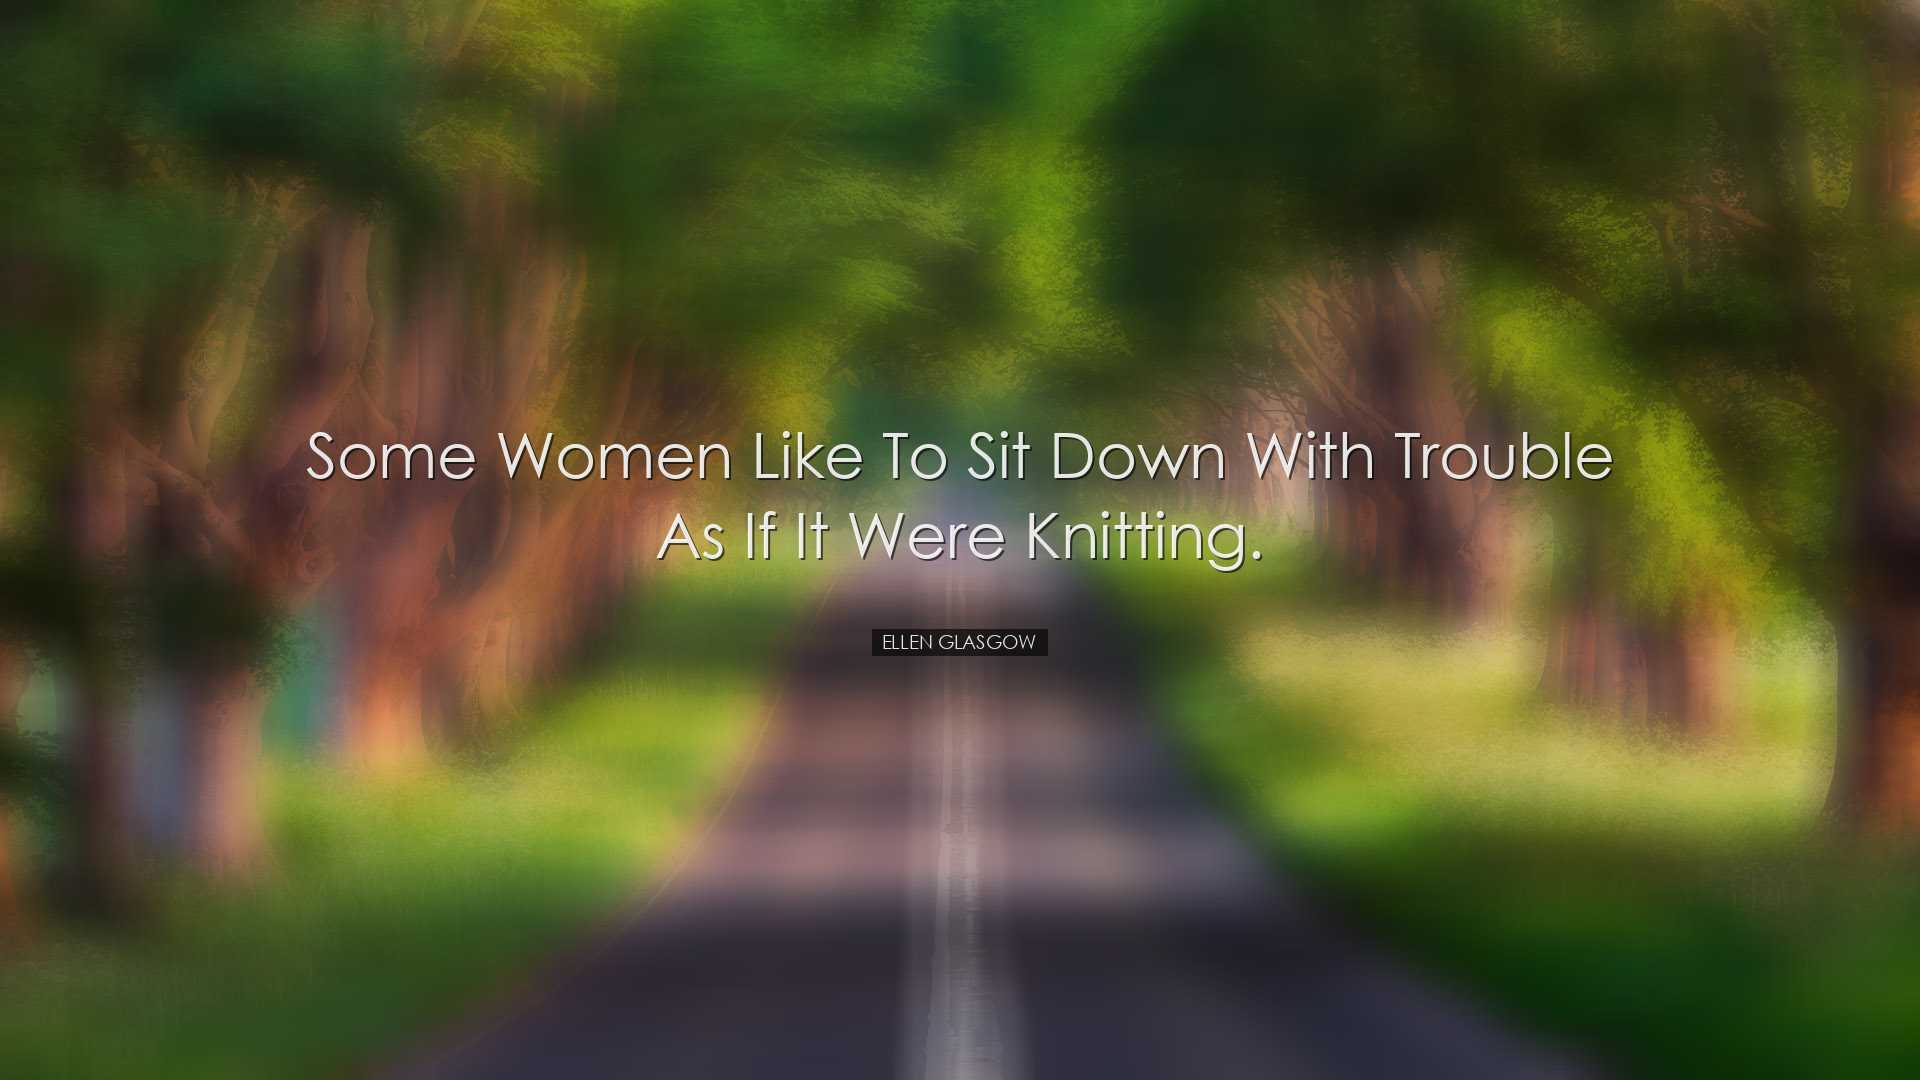 Some women like to sit down with trouble as if it were knitting. -